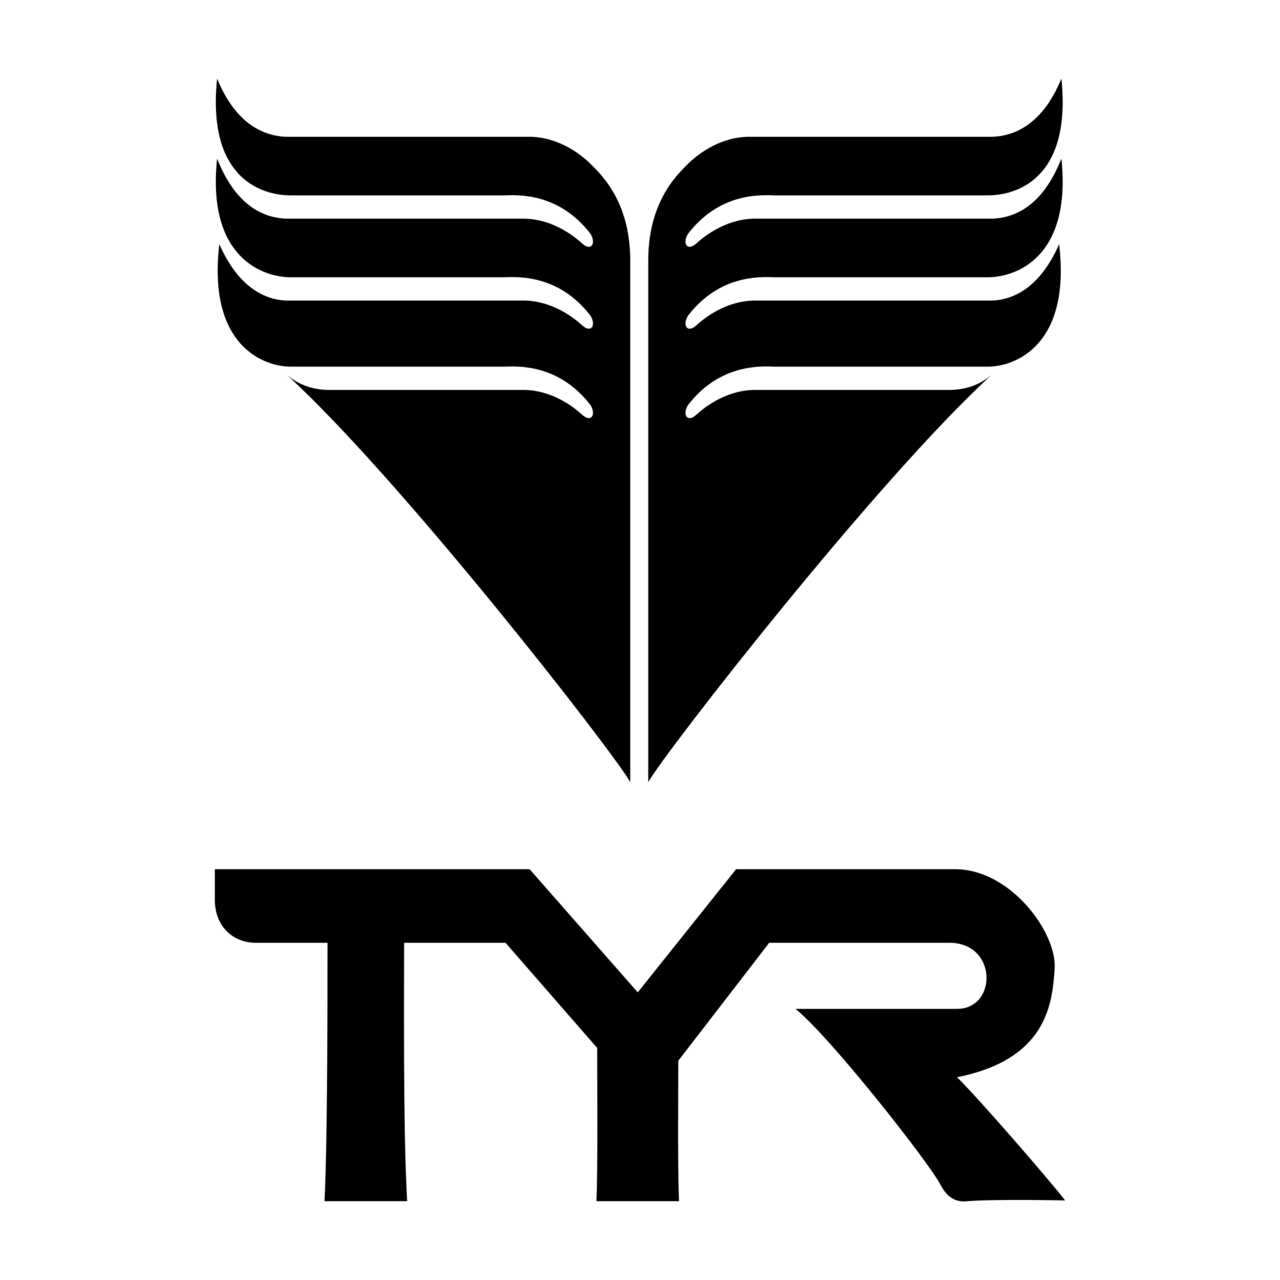 A black and white logo for tyr with a triangle and wings.